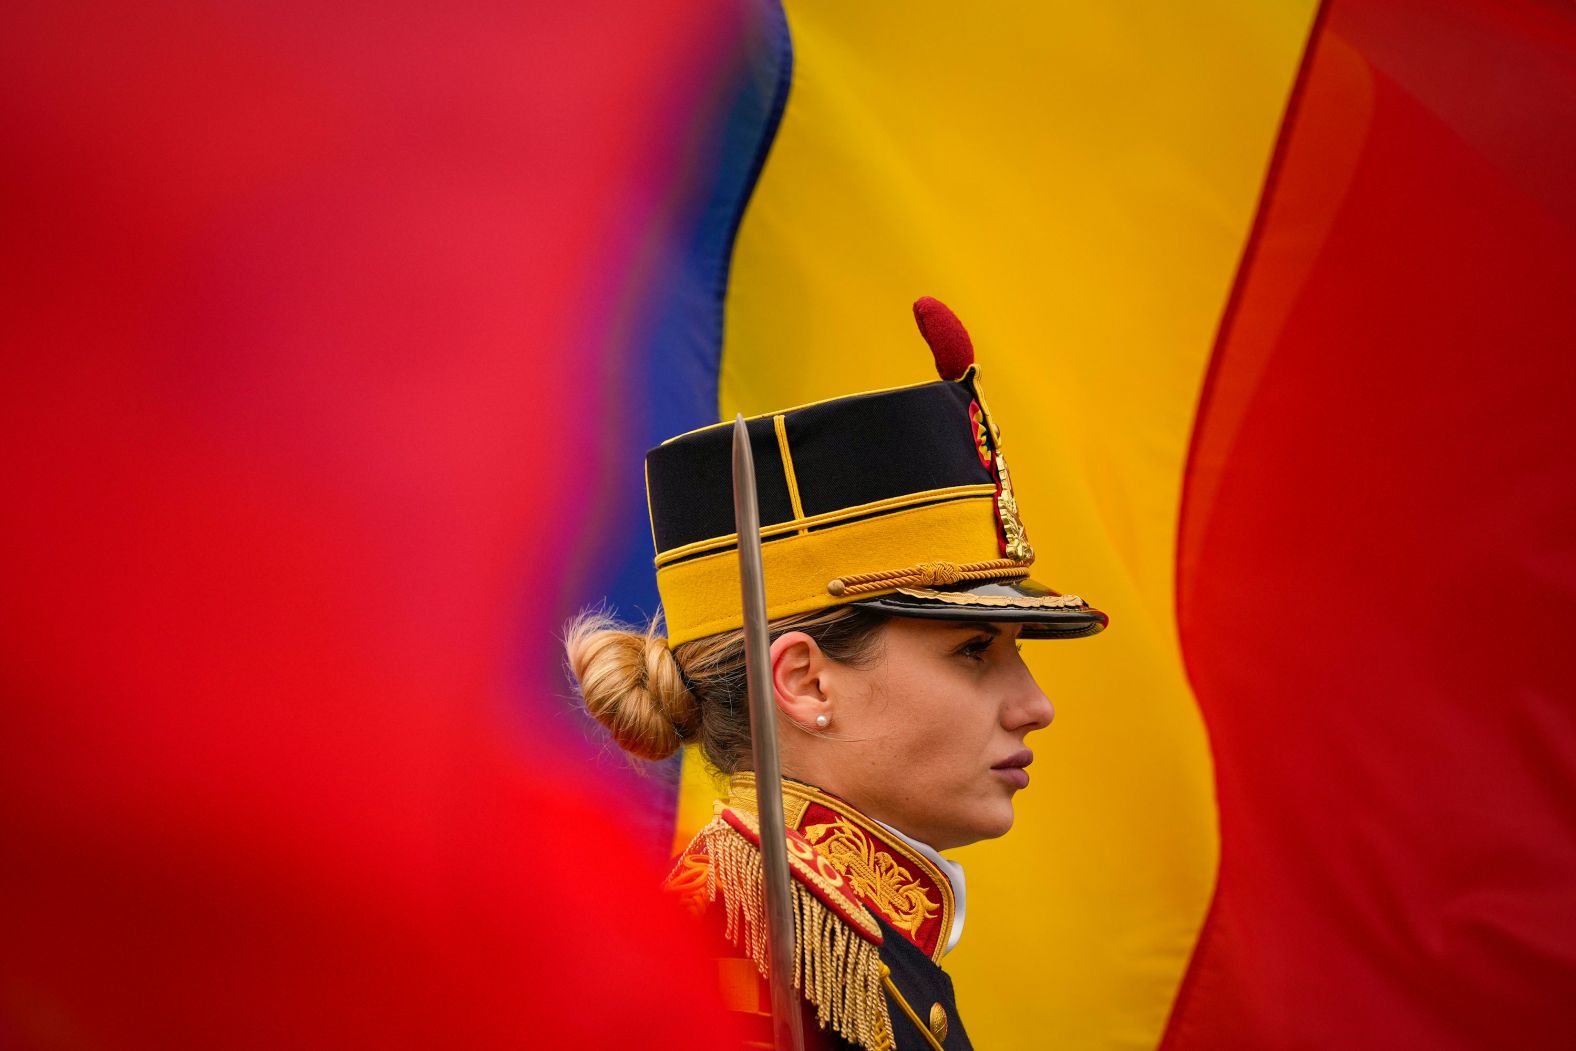 An honor guard soldier stands at attention on Wednesday, December 21, during a memorial service for those killed in the 1989 anti-communist uprising at University Square in Bucharest, Romania.